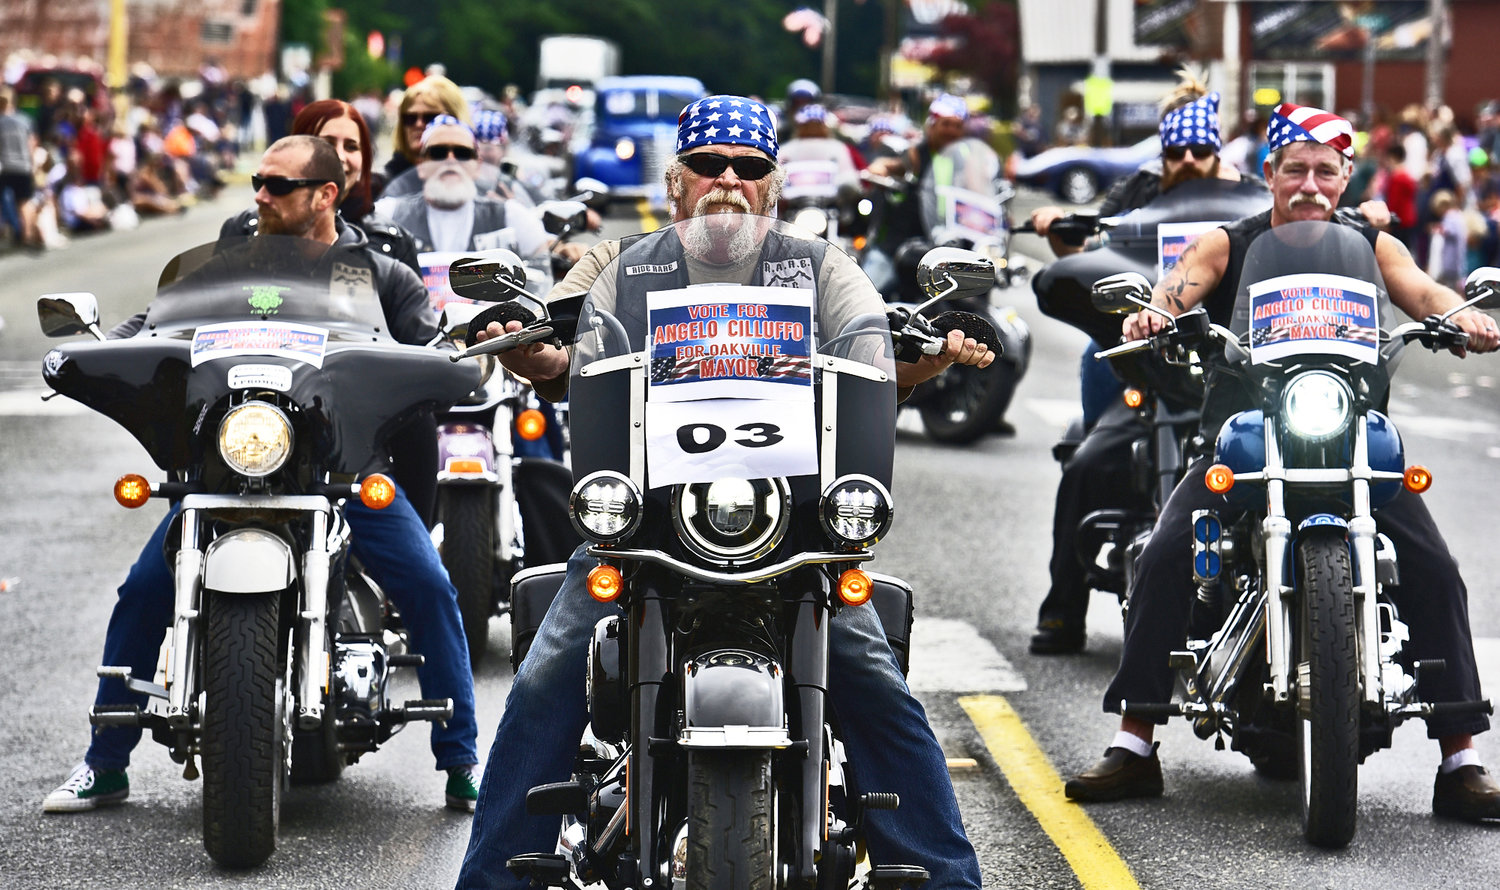 Oakville Mayor Angelo Cilluffo, leads a group of motorcycle riders as they participate in Oakville’s Independence Day parade on Saturday, July 3. The club, called Real American Riding Enthusiasts (RARE), does a lot of charity work, Cilluffo said.